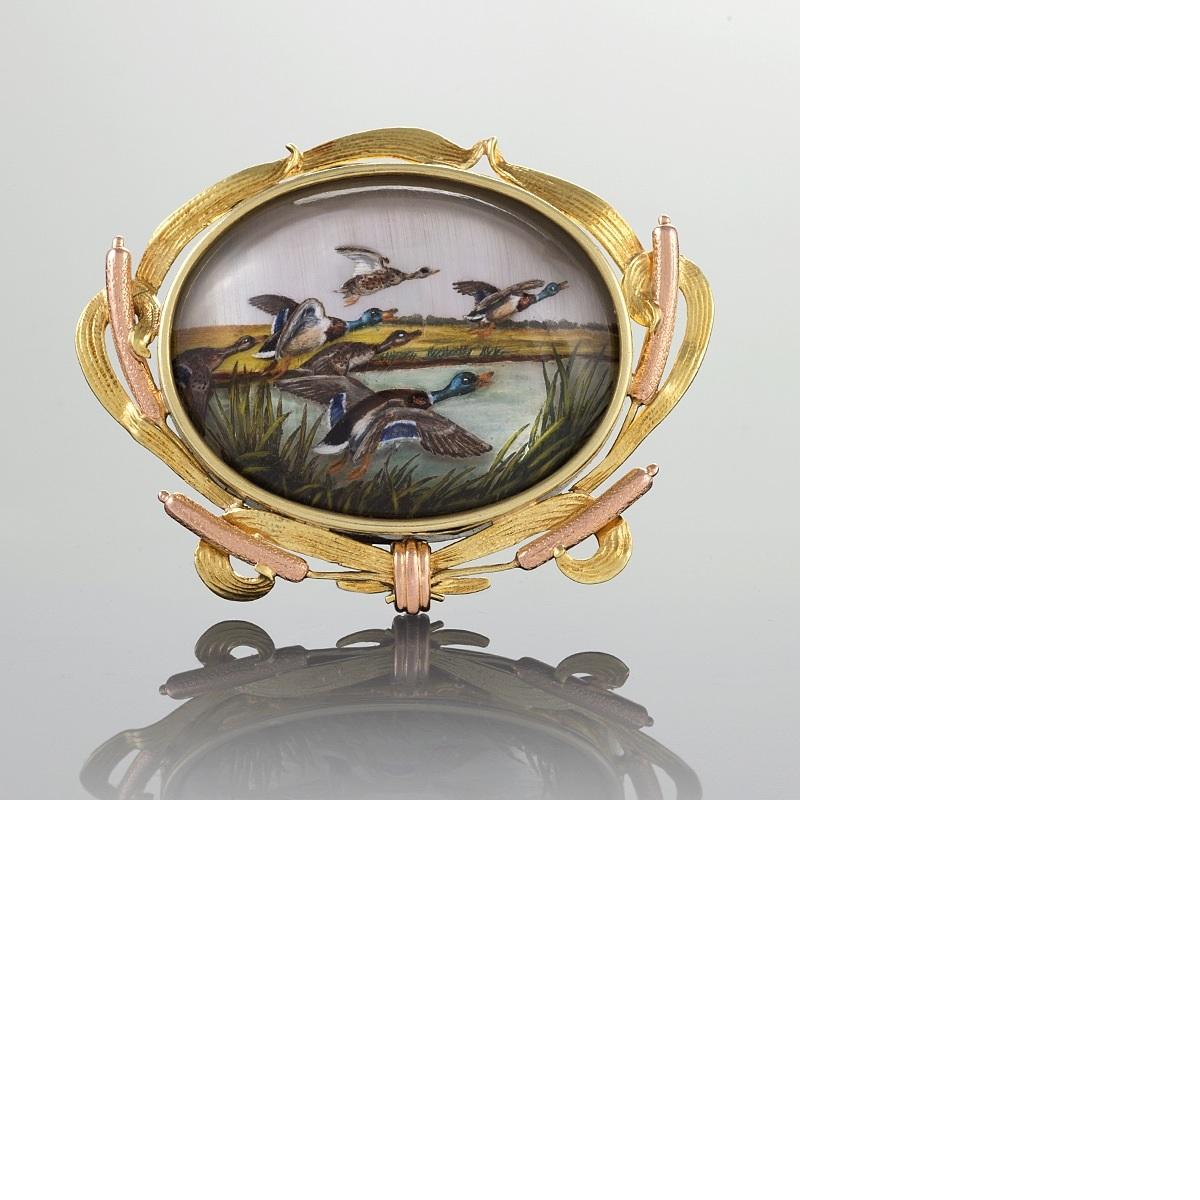 An English Victorian 18 karat gold reverse crystal brooch. The finely painted crystal brooch represents ducks in lift-off.  The yellow and red gold frame is decorated with dimensional pussy willows intertwined with ribbon.  Circa 1880's.

Reverse